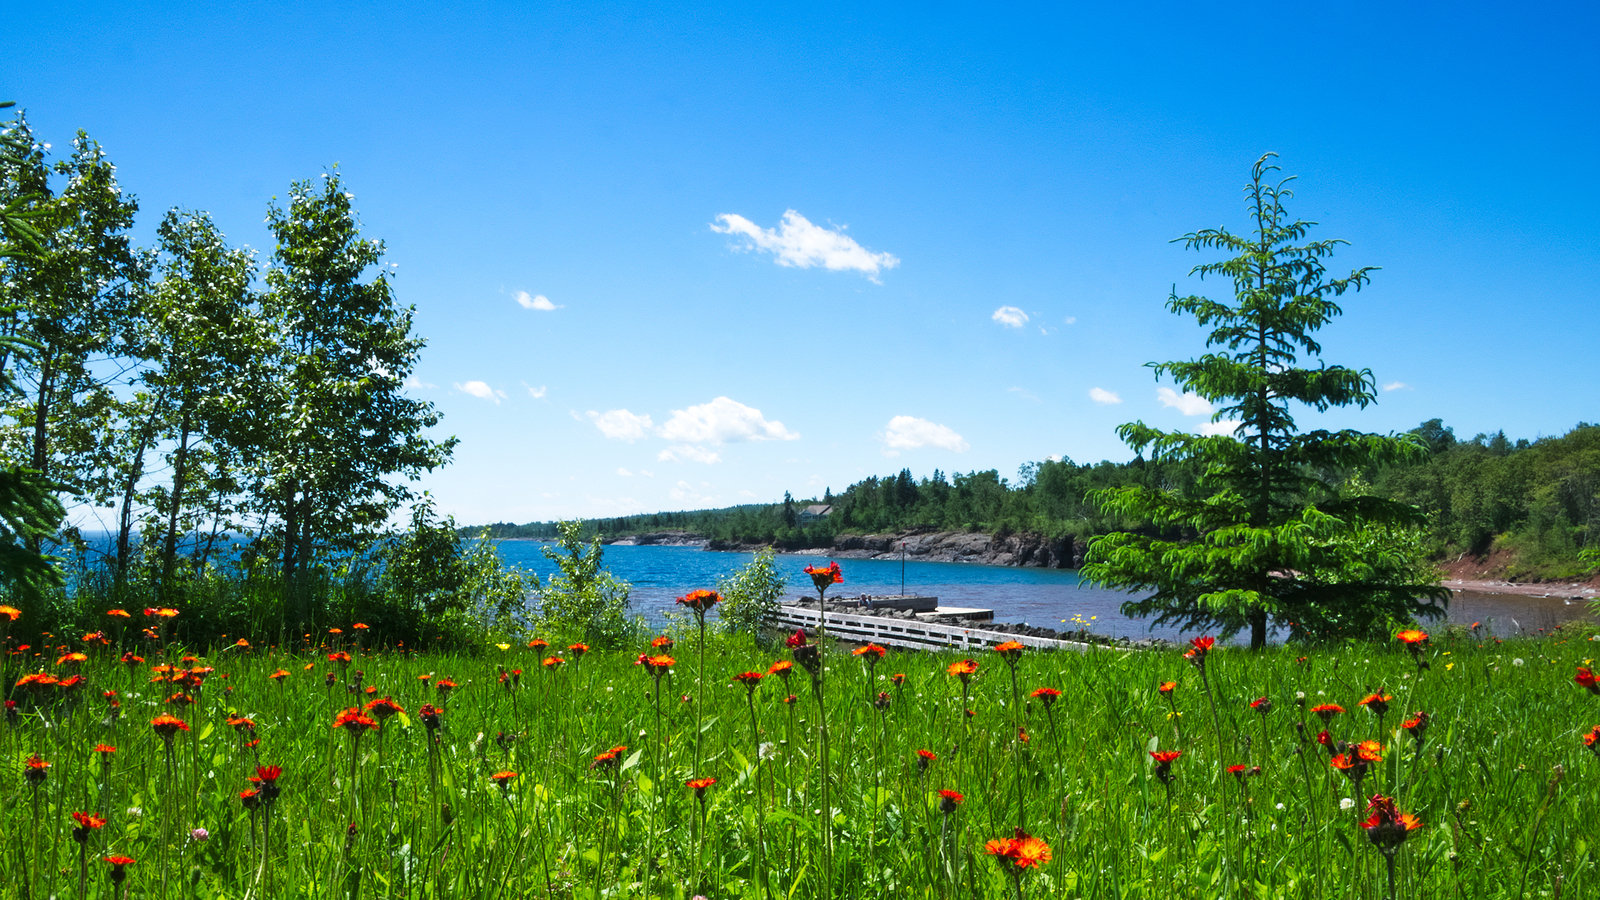 Beautiful wild flowers growing near the north shore of Lake Superior in Minnesota on a sunny day.